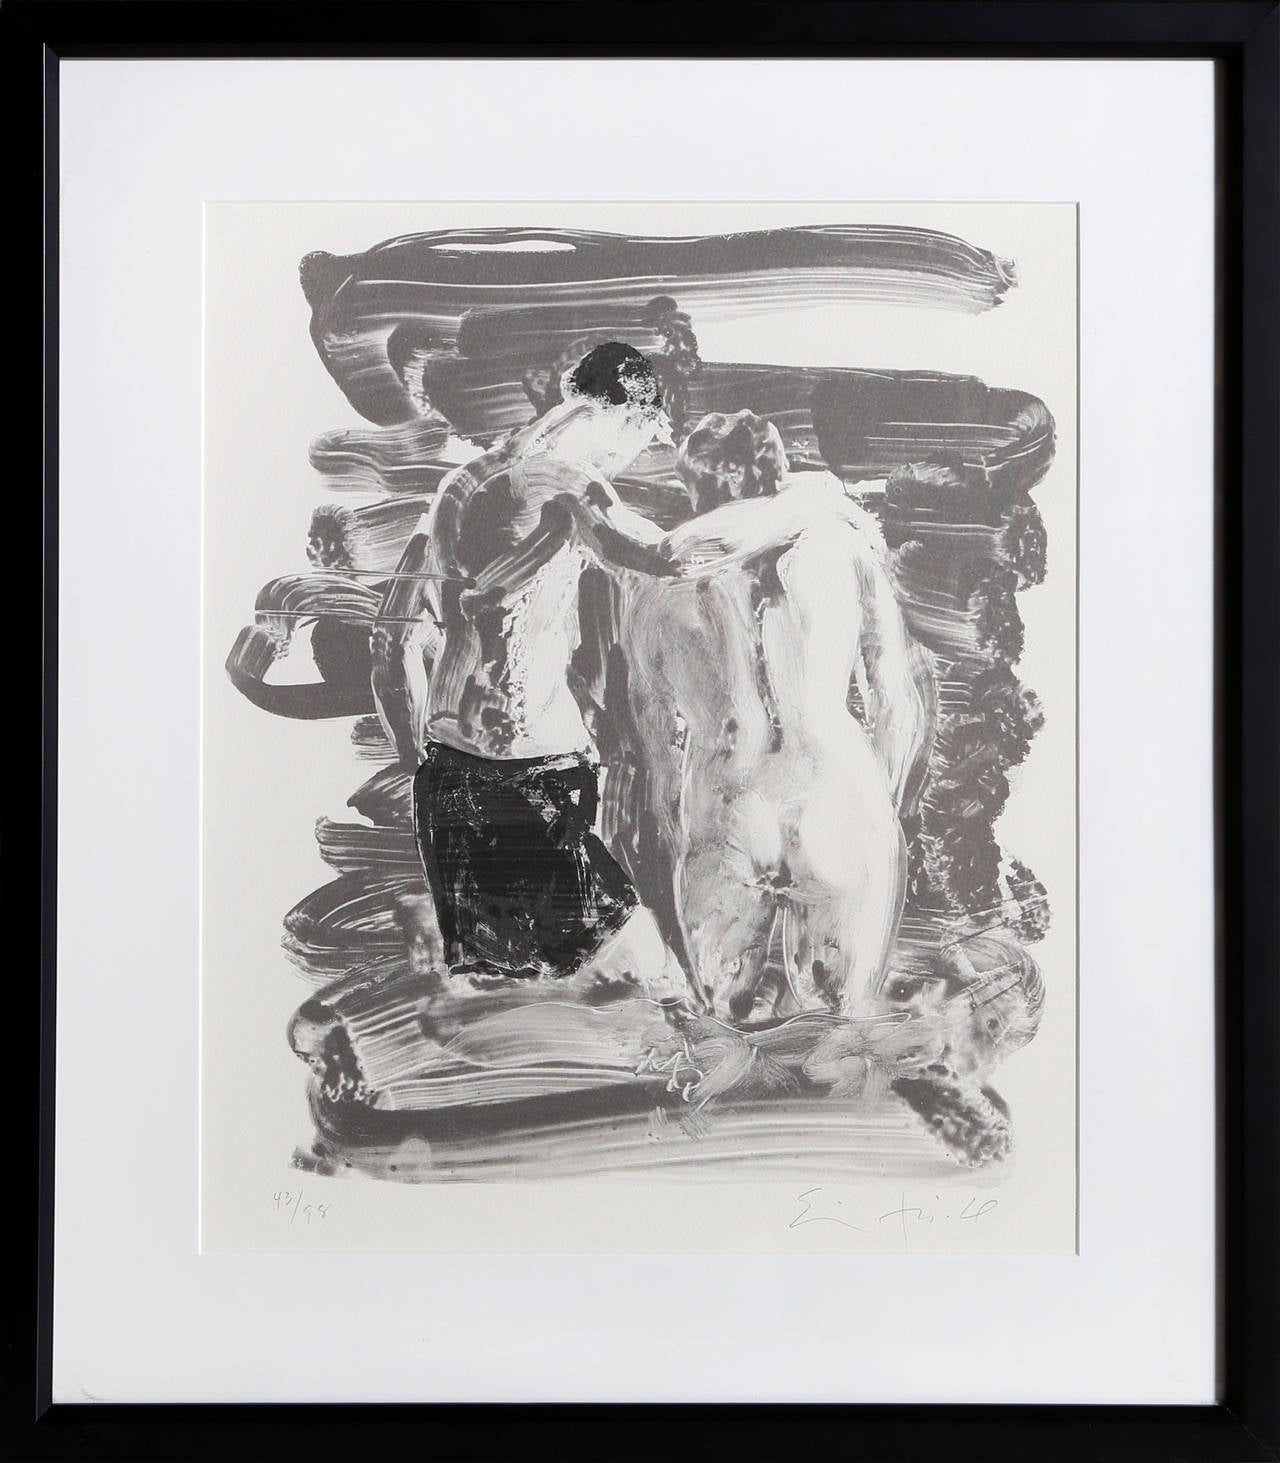 Artist: Eric Fischl, American (1948 - )
Title: Two Bathers
Year: 2007 
Medium: Lithograph, signed and numbered in pencil 
Edition: 98 
Size: 17 x 15 in. (43.18 x 38.1 cm)
Frame Size: 23.5 x 20.5 inches